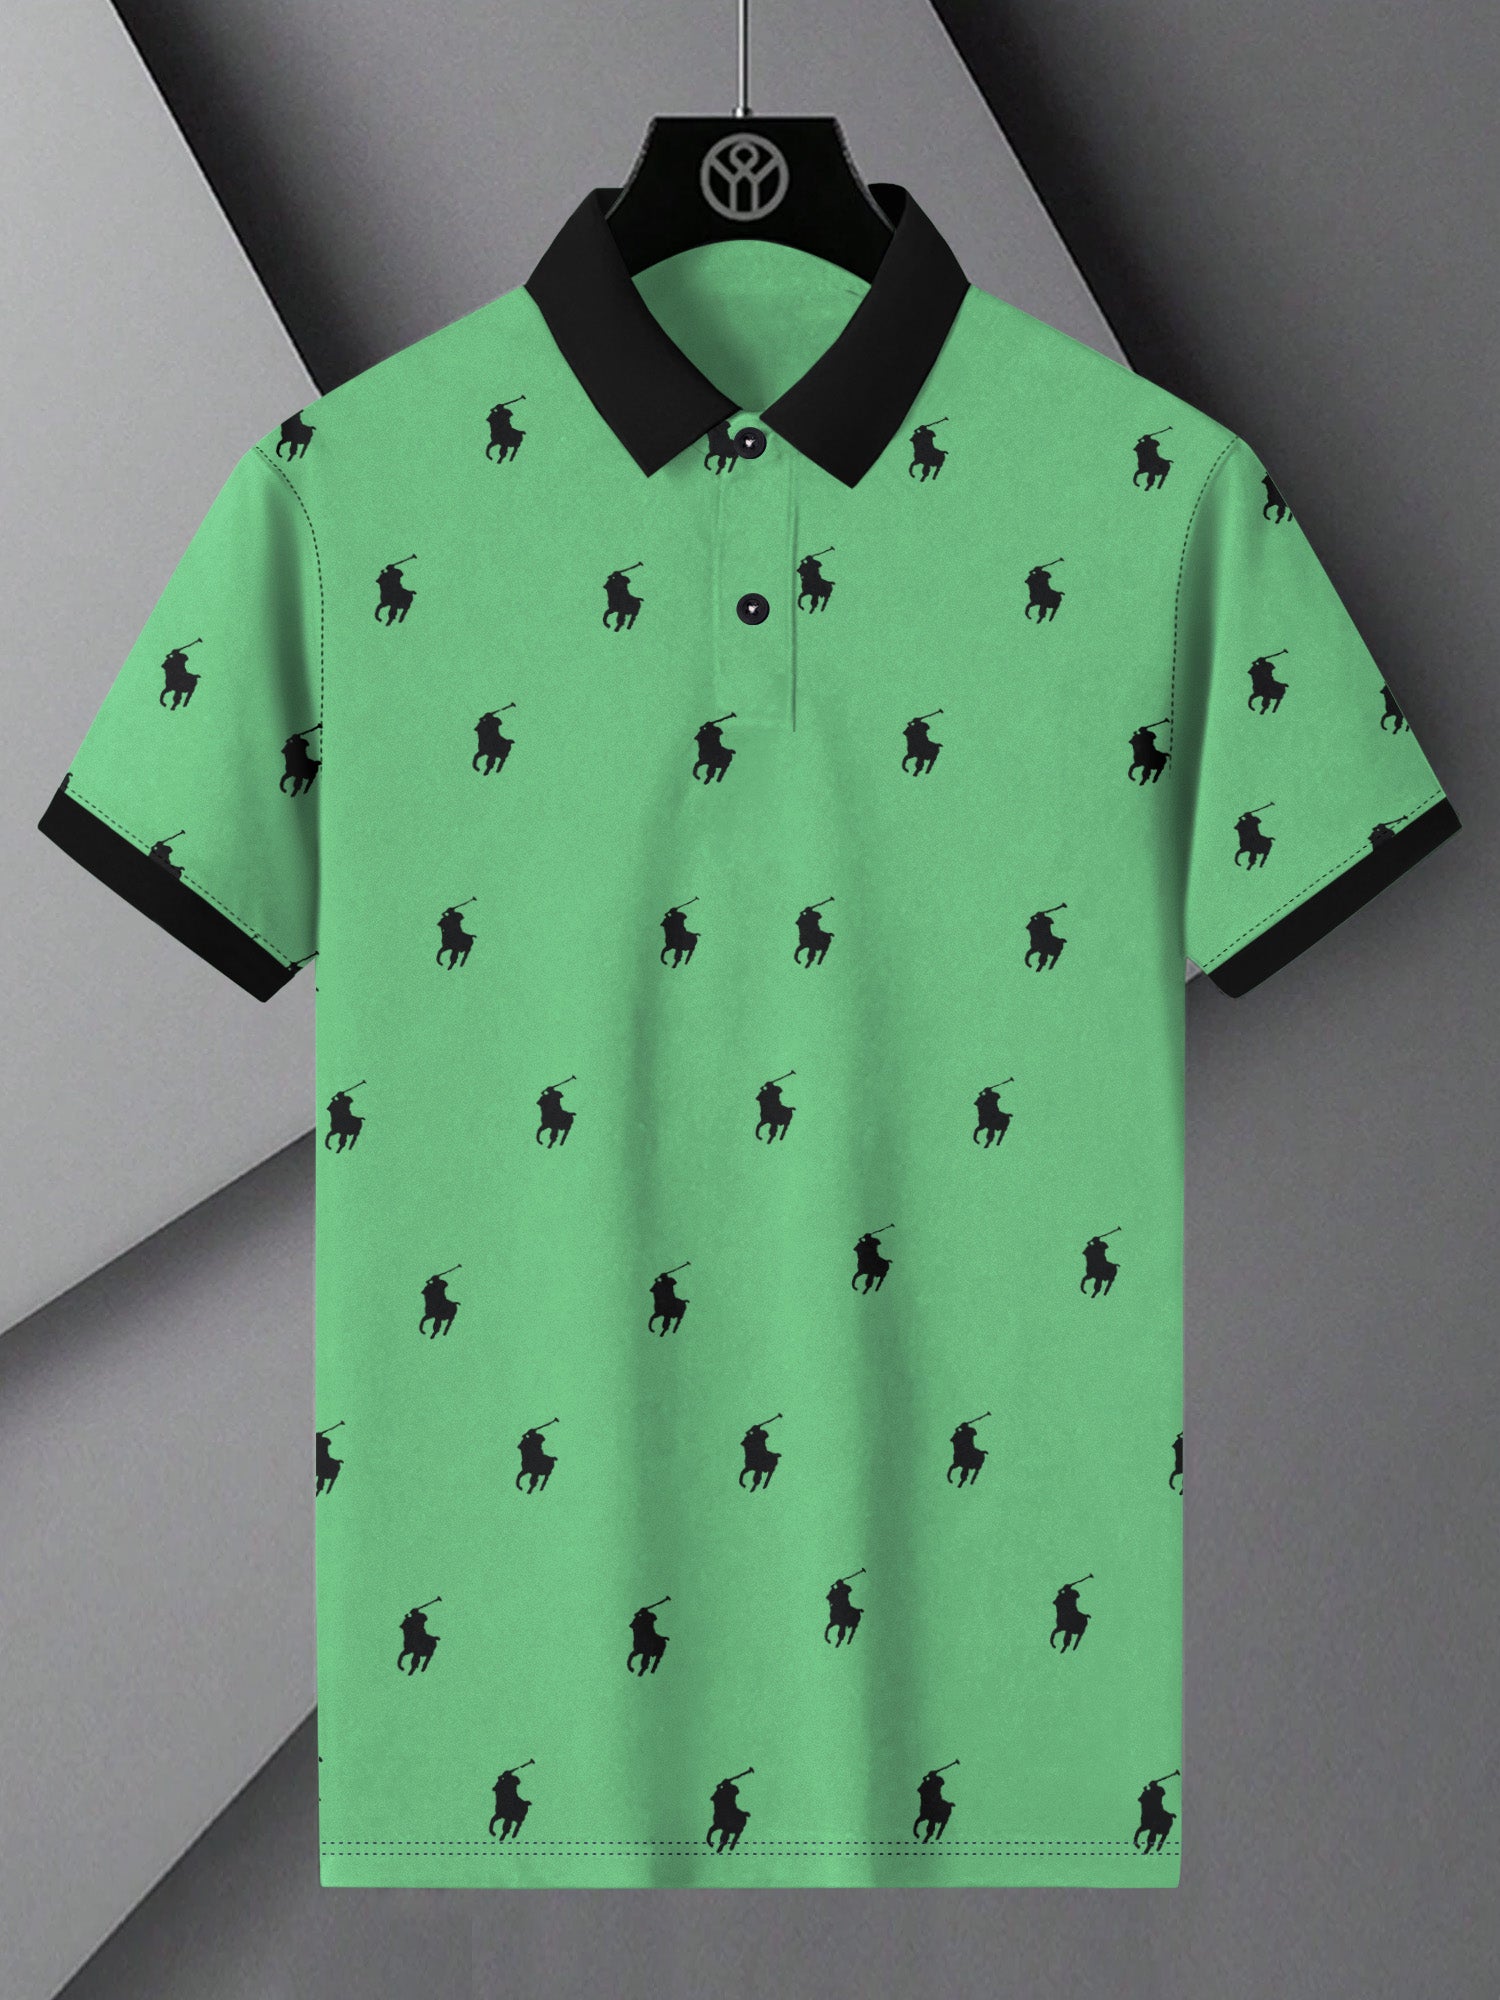 PRL Summer Polo Shirt For Men-Cyan Green with Allover Print-BE750/BR12998